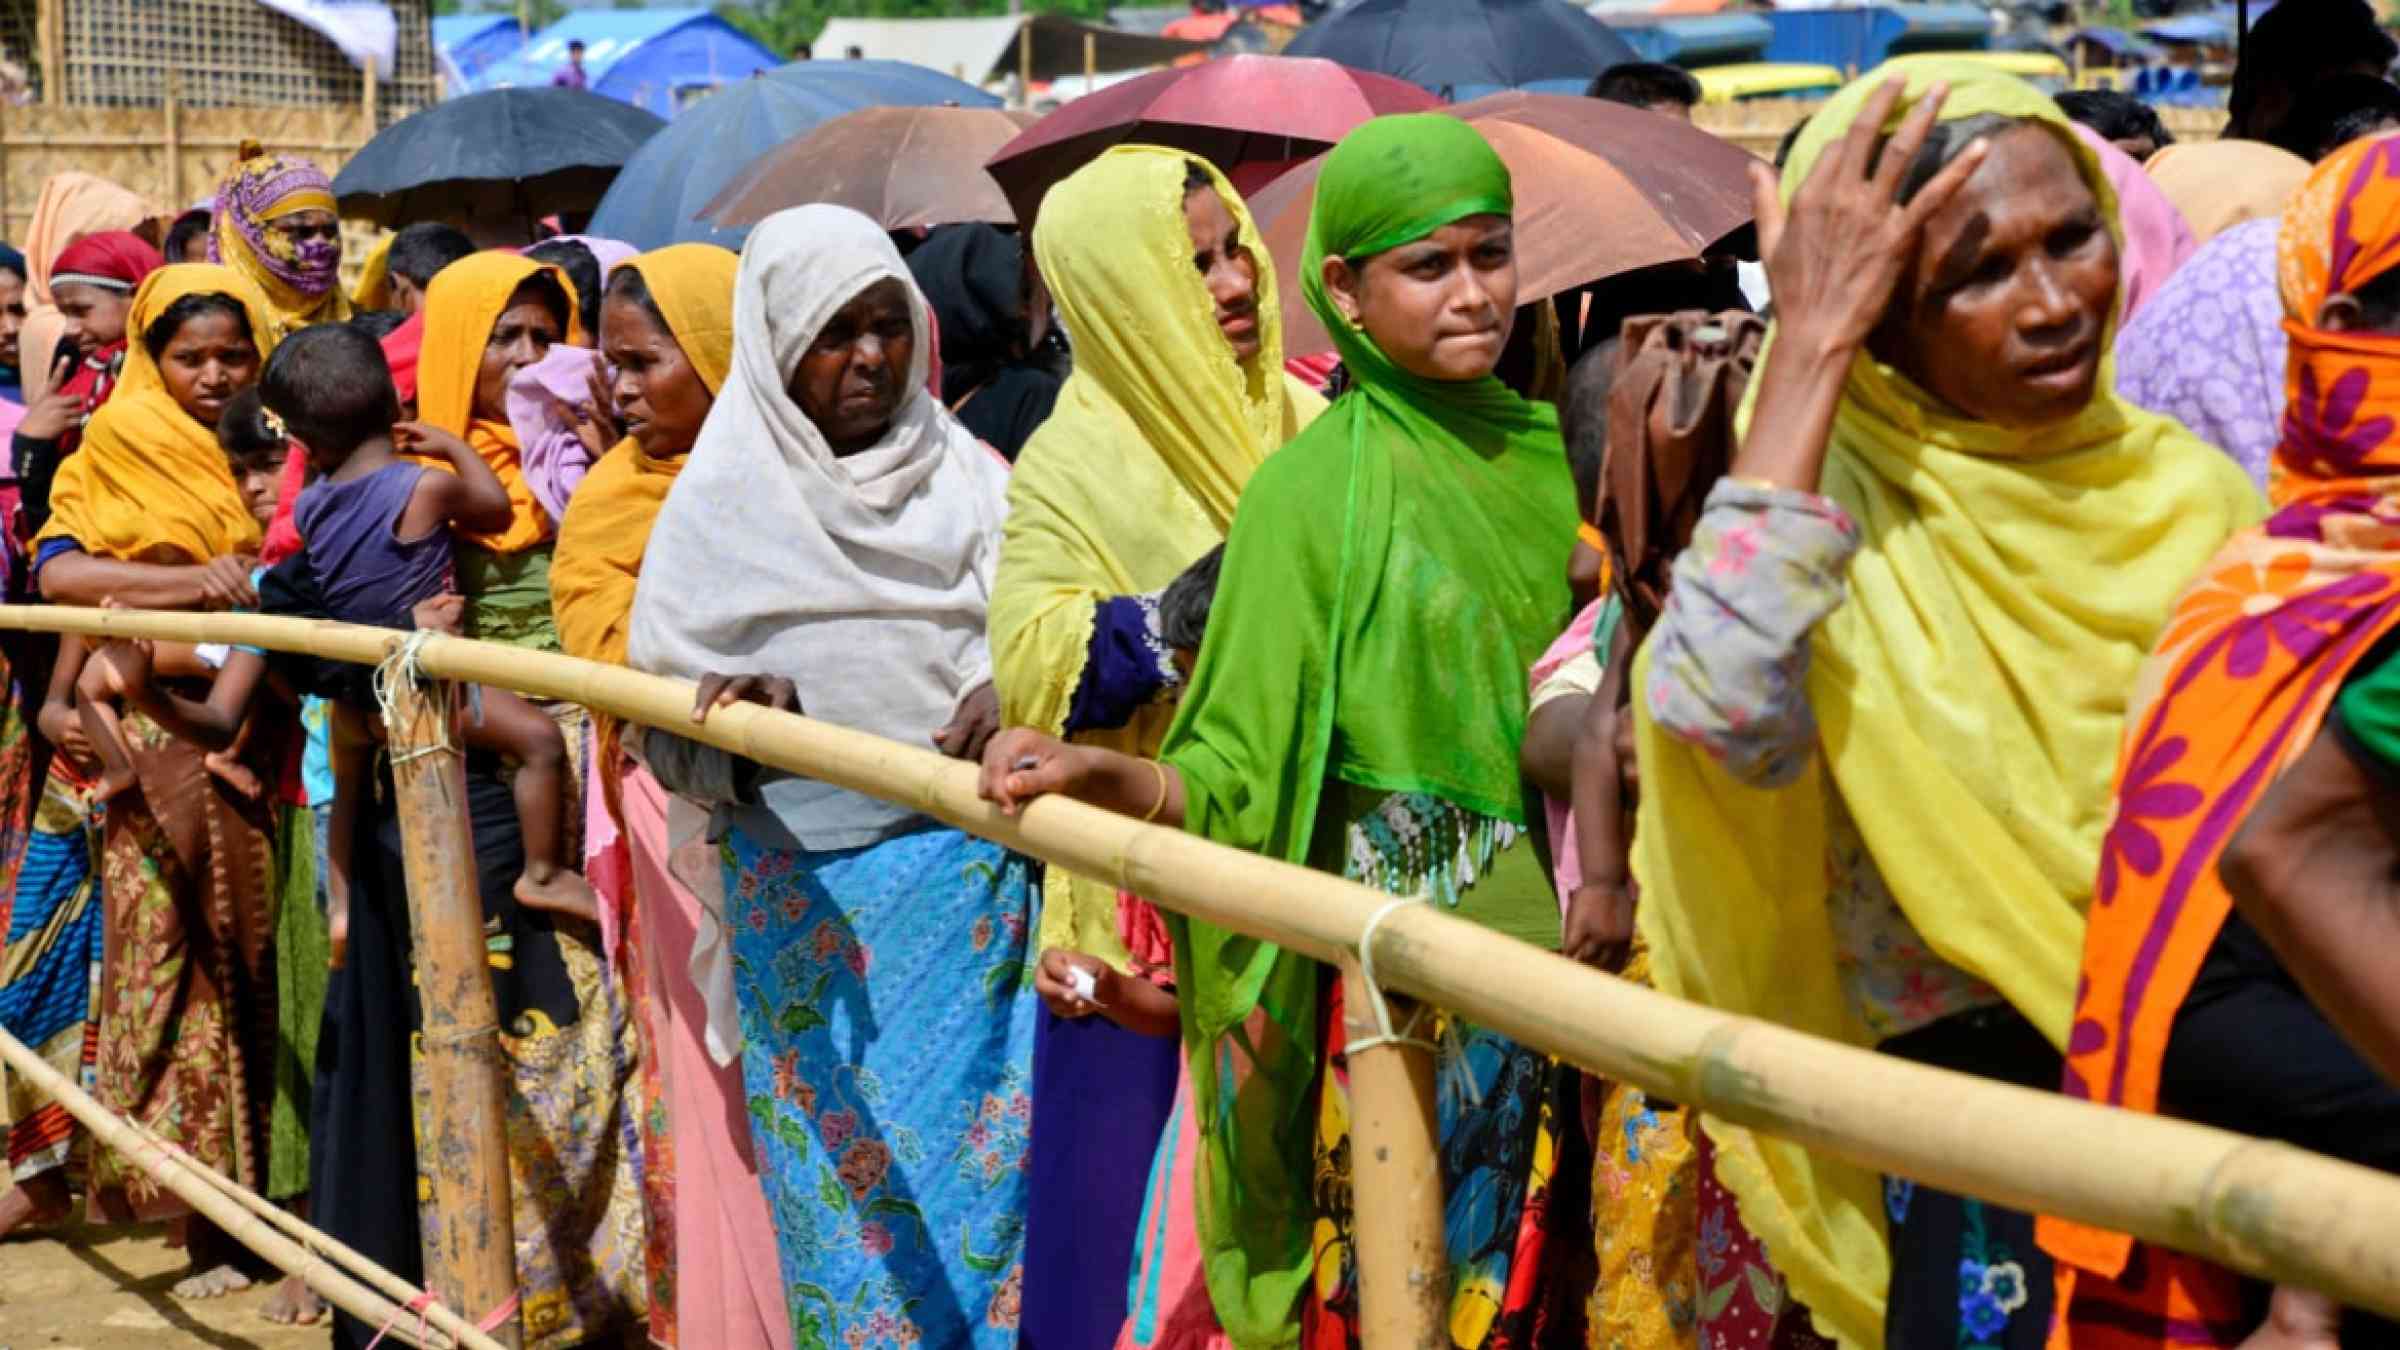 Rohingya refugee women wait to collect relief aid at the palongkhali makeshift Camp in Cox's Bazar, Bangladesh, on October 06, 2017